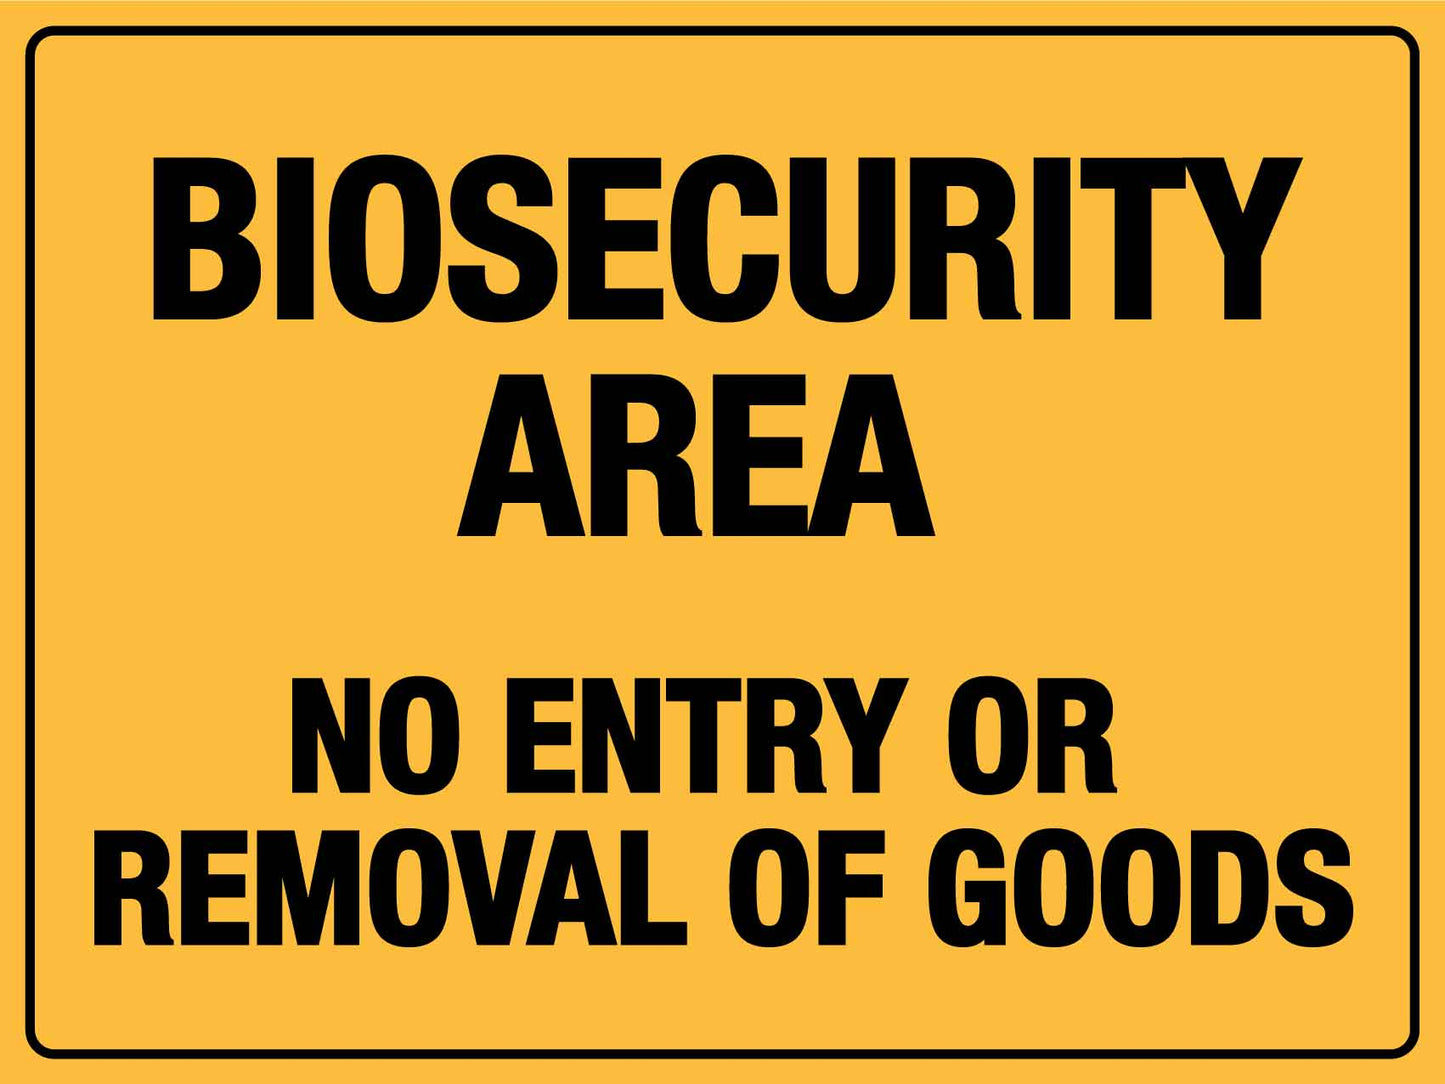 Biosecurity Area No Entry Or Removal Of Goods Sign